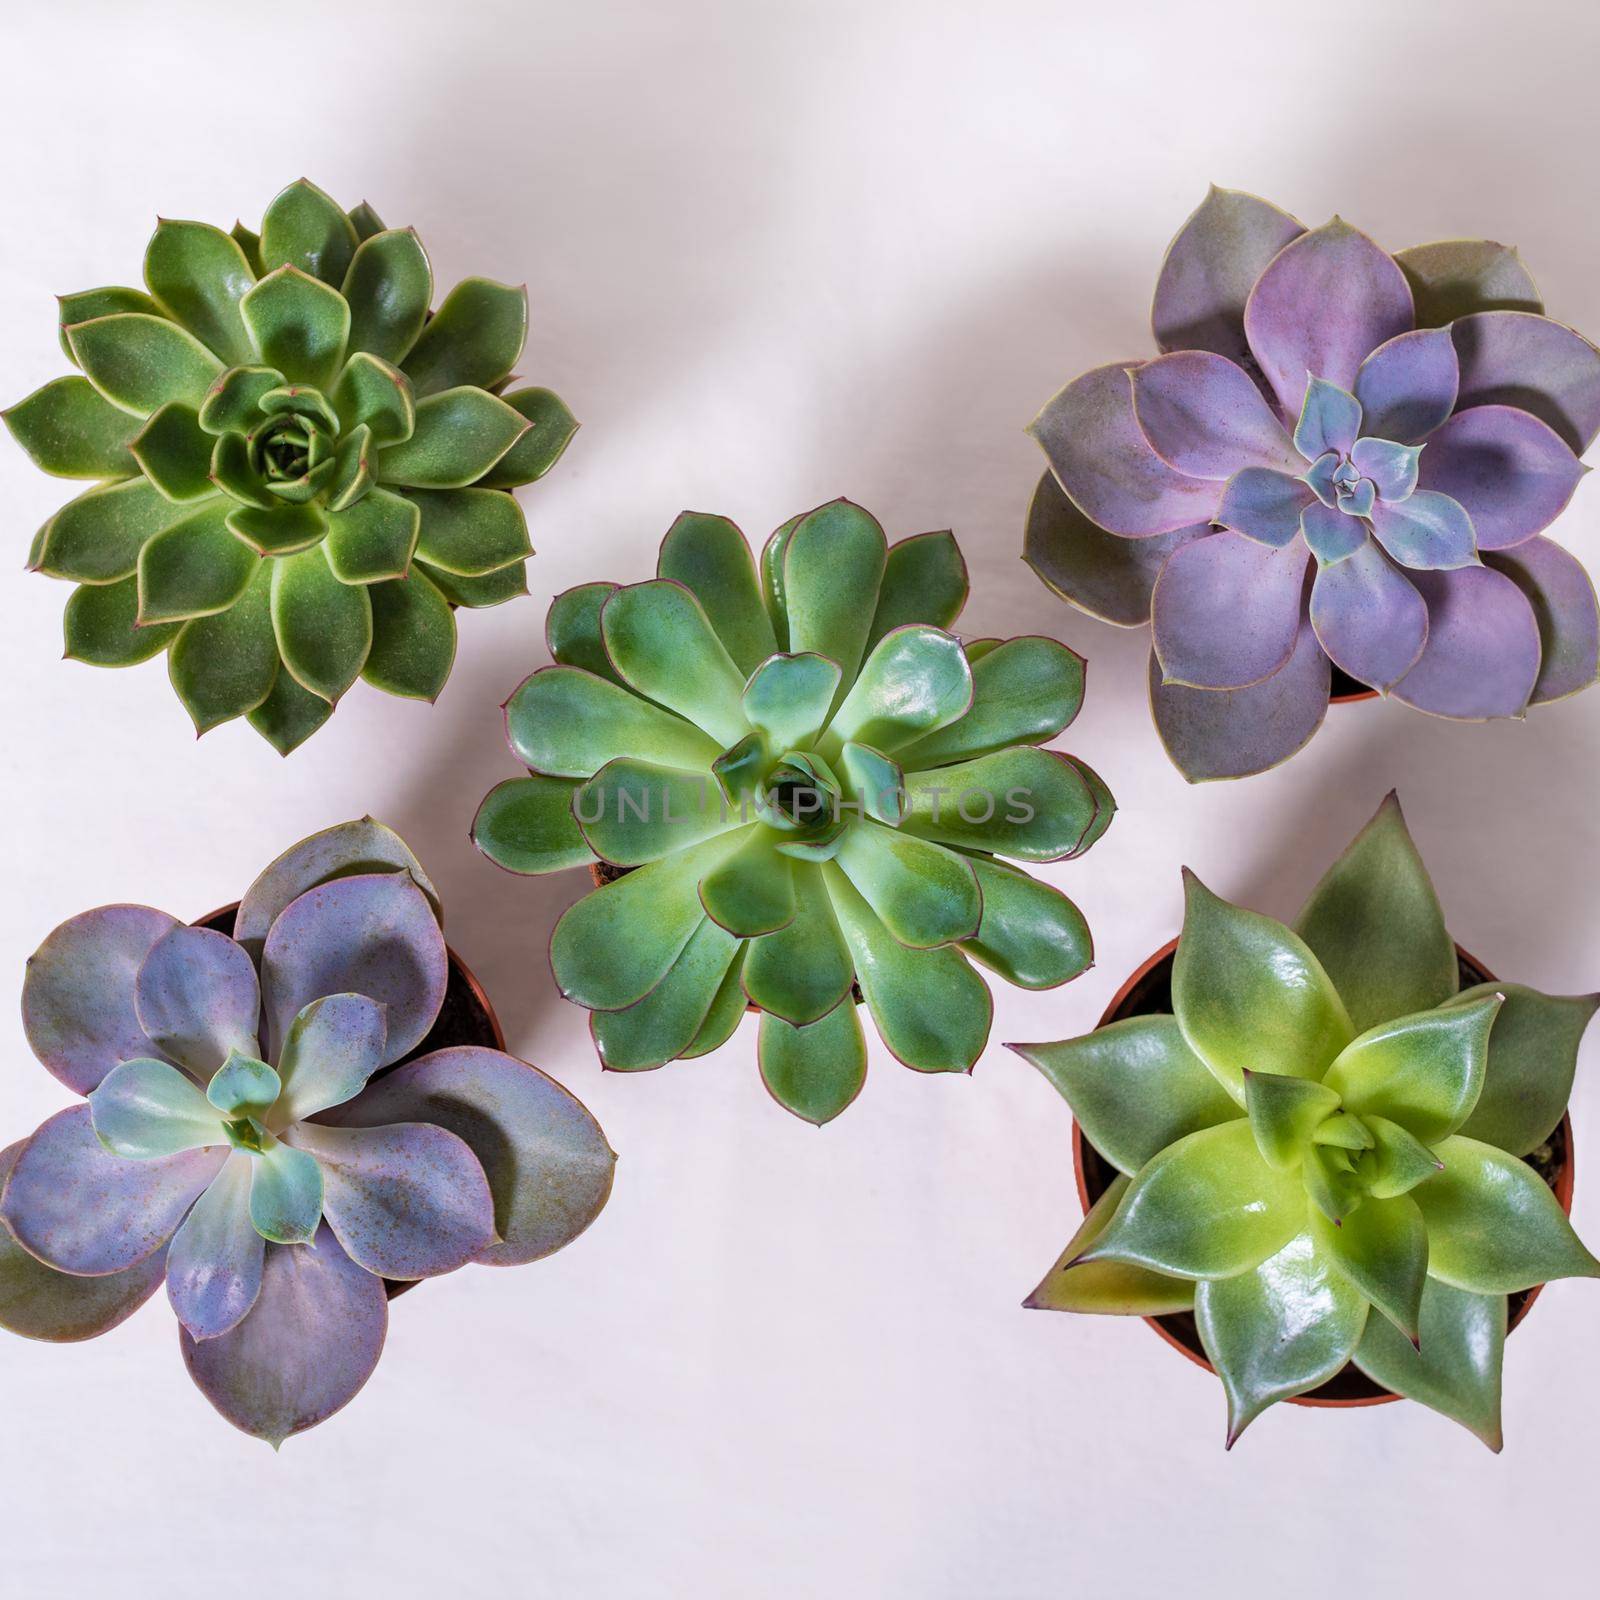 Succulent plants from above by ferhad